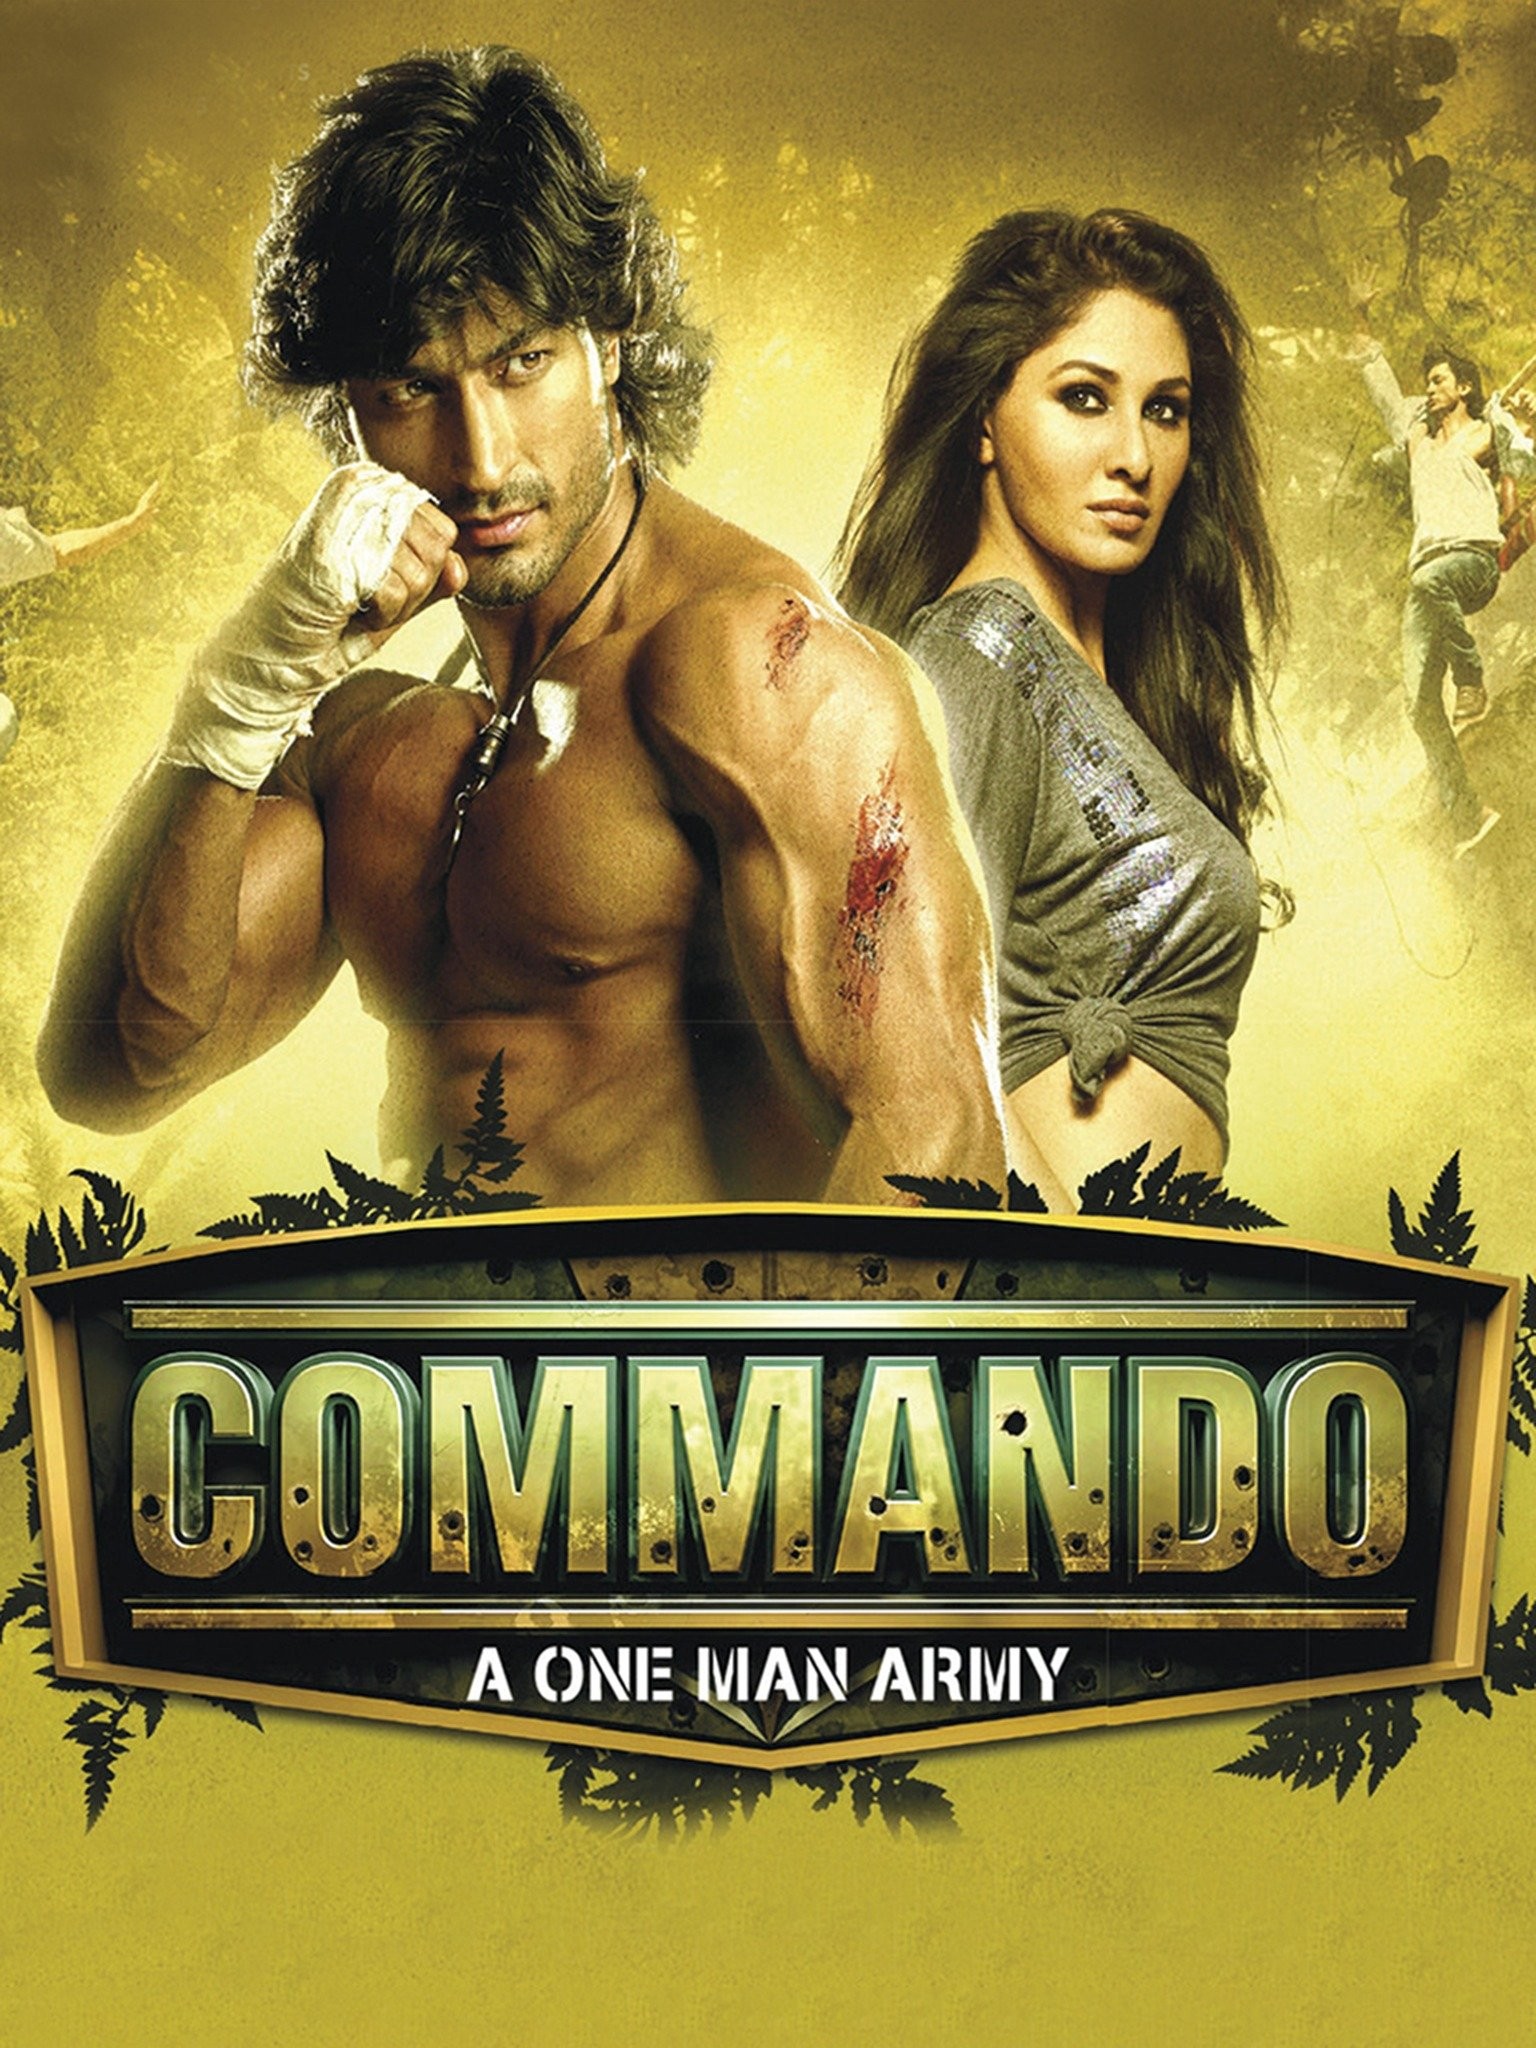 clinton bland recommends commando full movie download pic